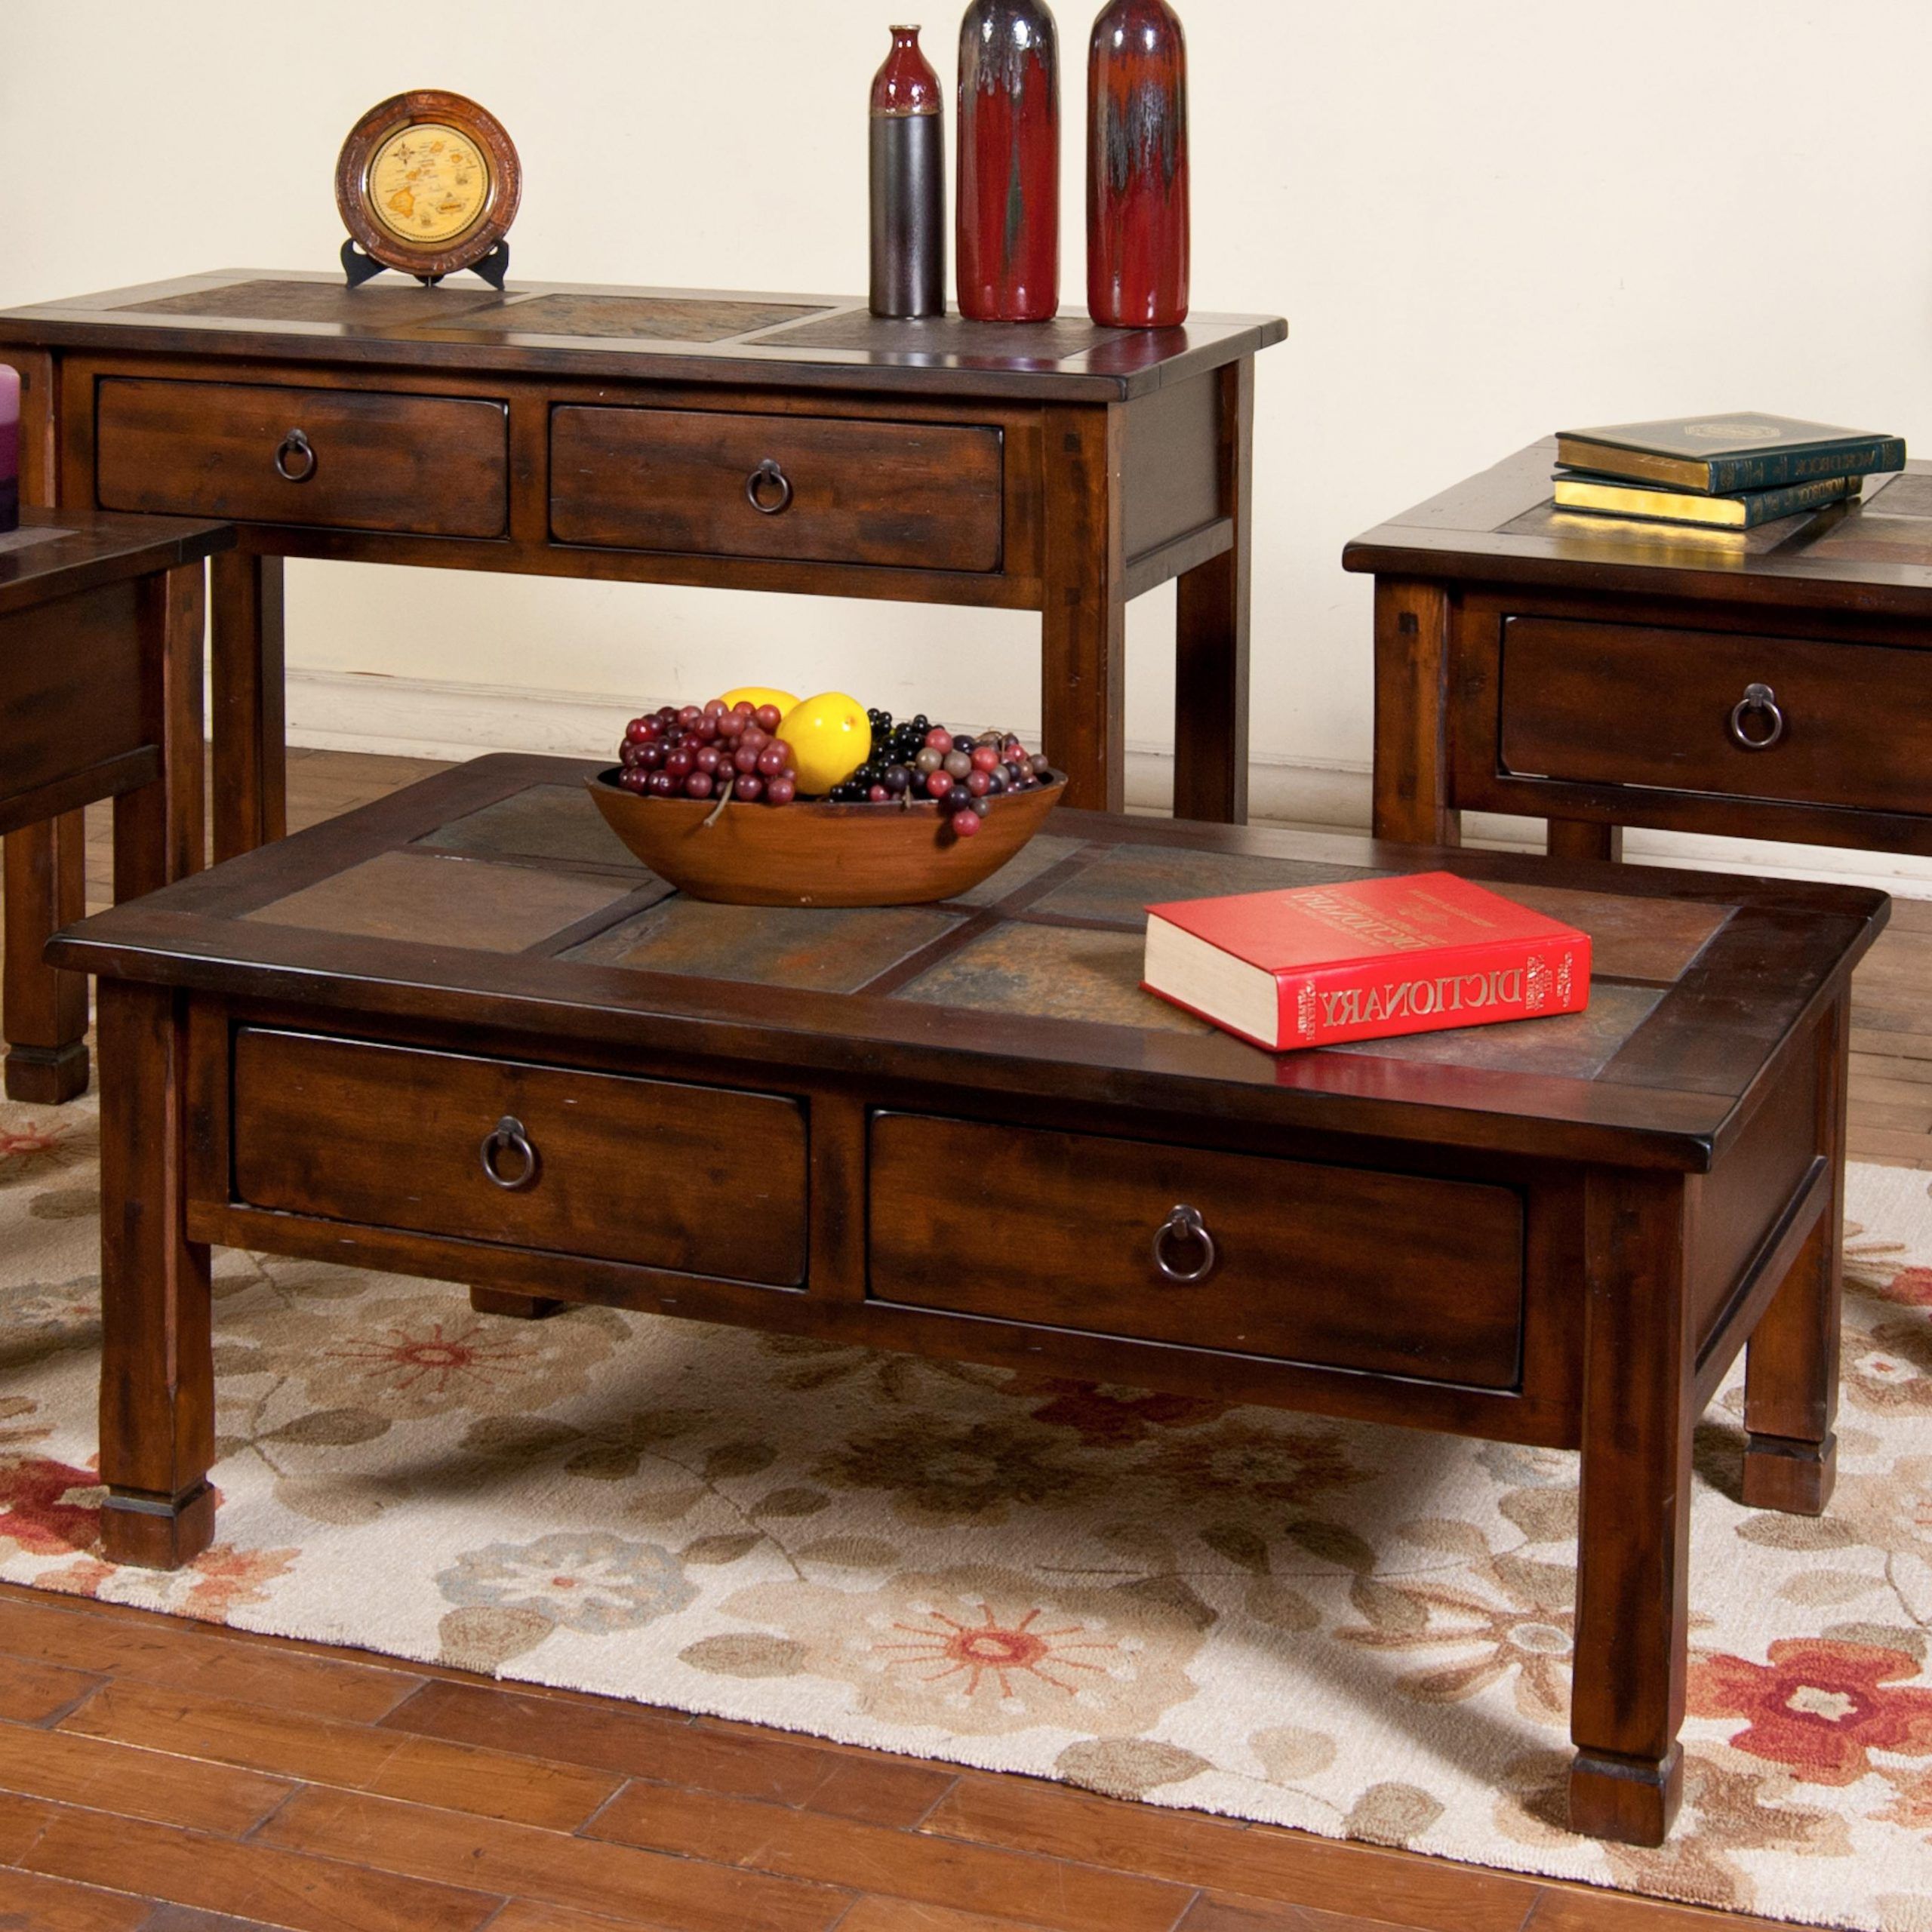 Well Liked 3 Piece Shelf Coffee Tables Throughout Coffee And End Tables With Drawers • Display Cabinet (View 7 of 20)